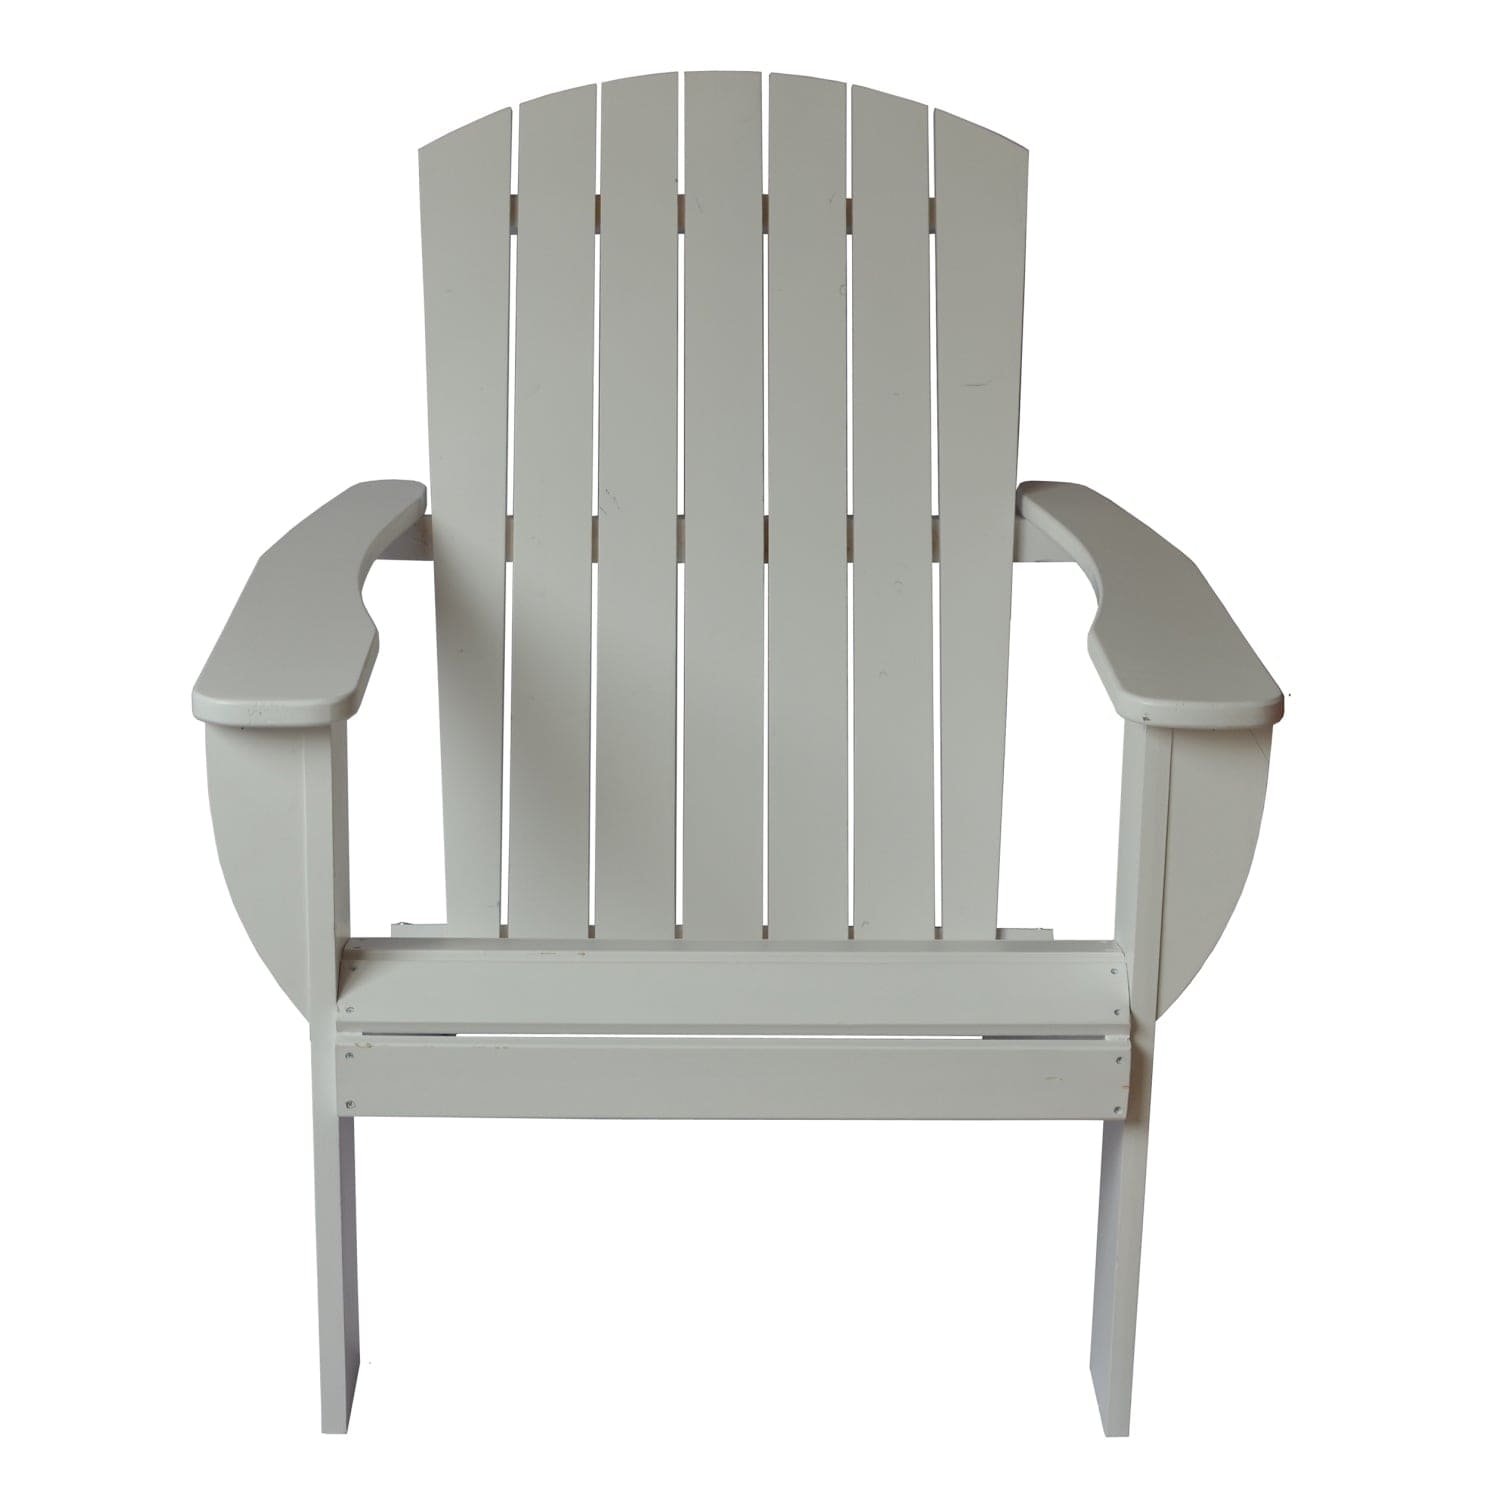 Riverstone Industries Outdoor Chairs Riverstone | Adirondack Chair with Side Table - White RSI-AC-WH-T